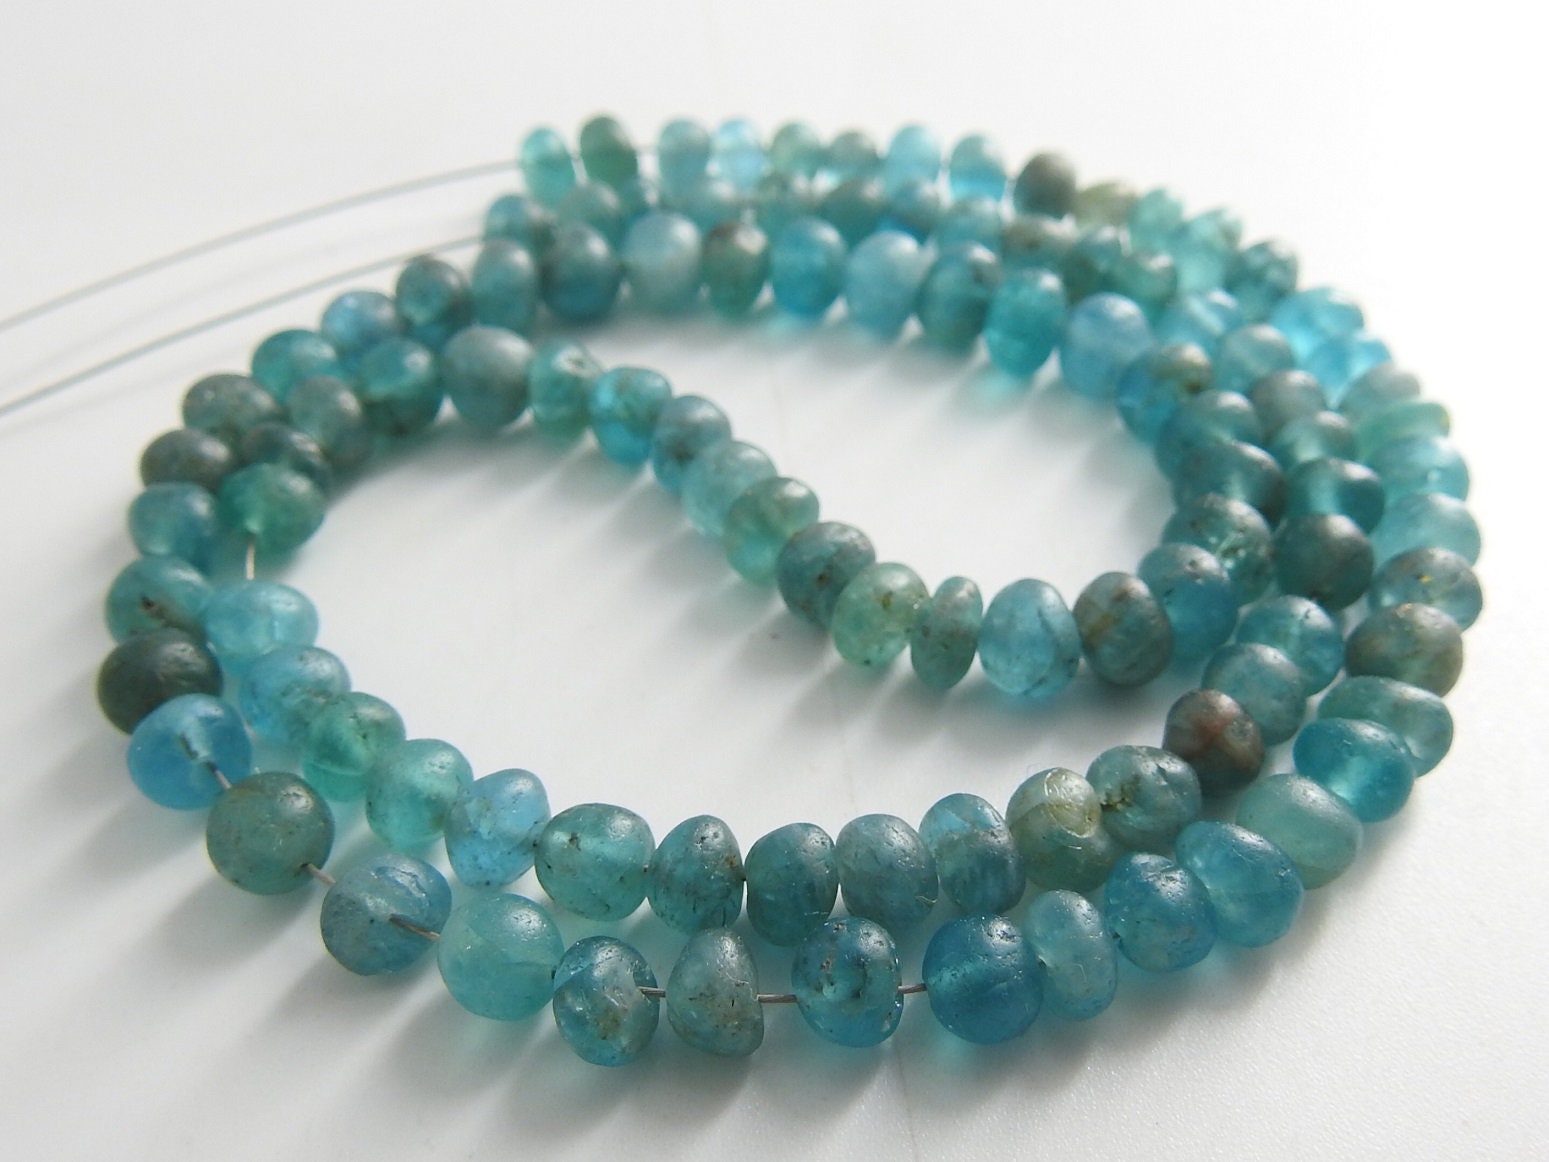 Sky Blue Apatite Roundel Bead,Smooth,Handmade,Matte Polished,Loose Bead,Necklace,For Making Jewelry,Wholesaler,Supplies 100%Natural B2 | Save 33% - Rajasthan Living 21